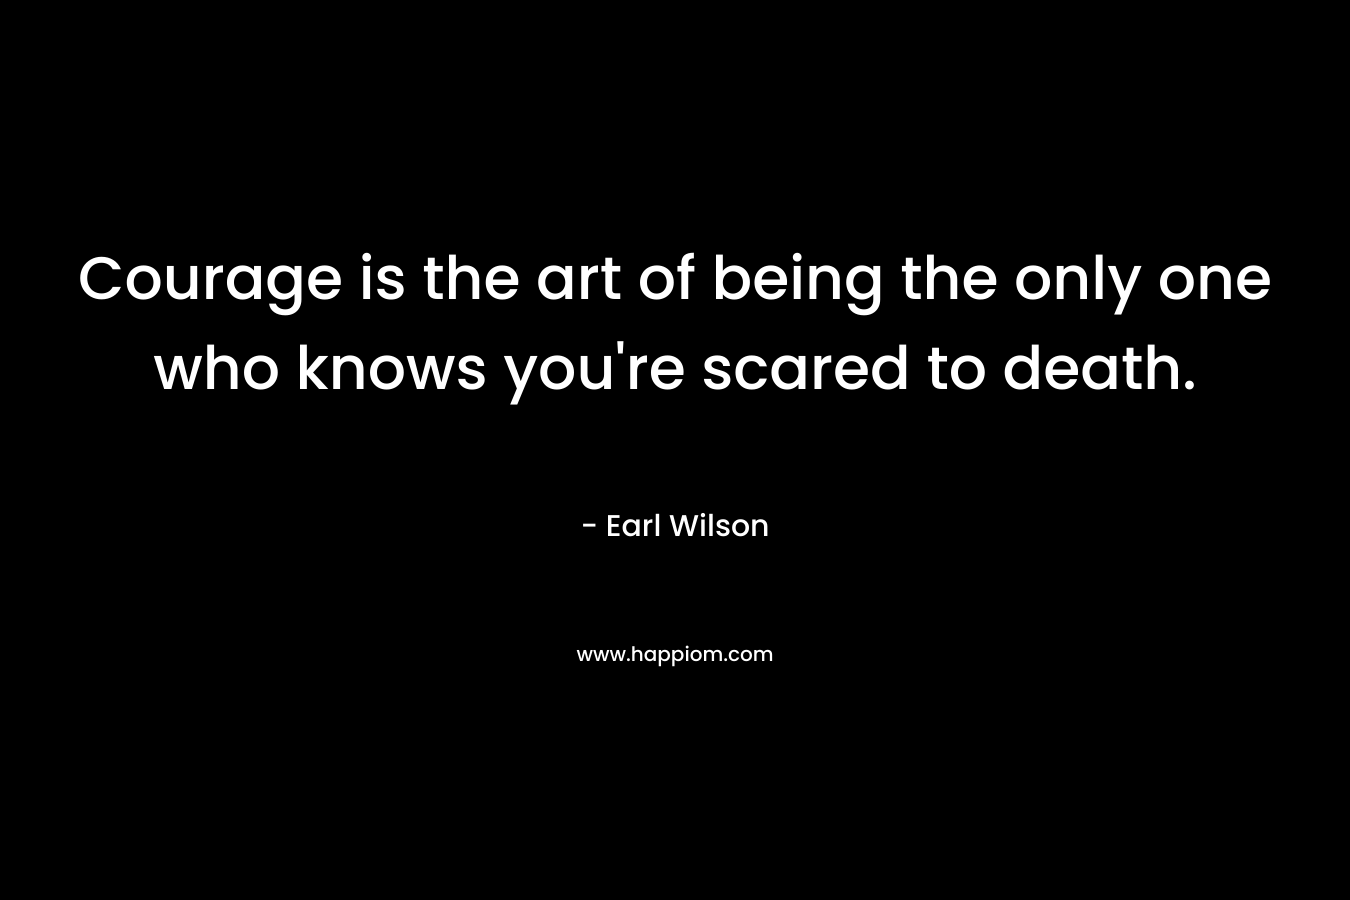 Courage is the art of being the only one who knows you’re scared to death. – Earl Wilson